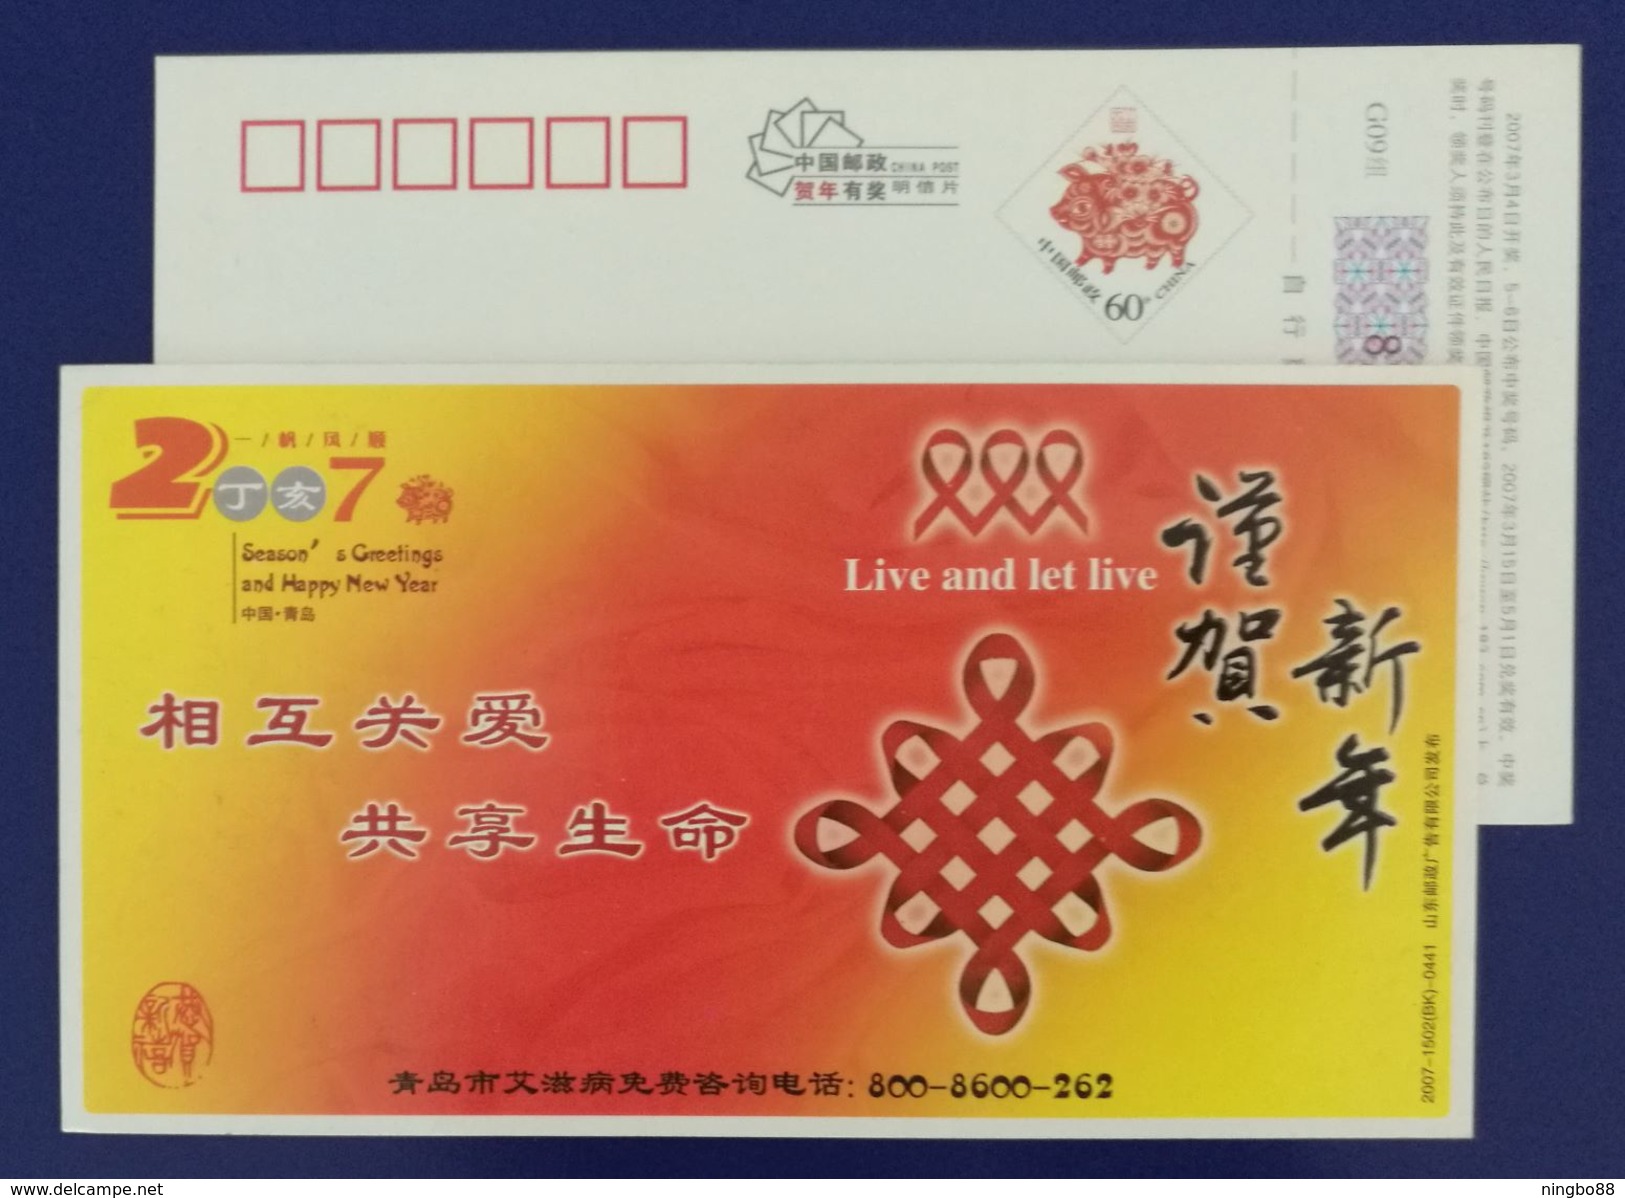 Live And Let Live,Red Ribbon,China 2007 Qingdao Aids Consultation Hotline Advertising Postal Stationery Card - Ziekte